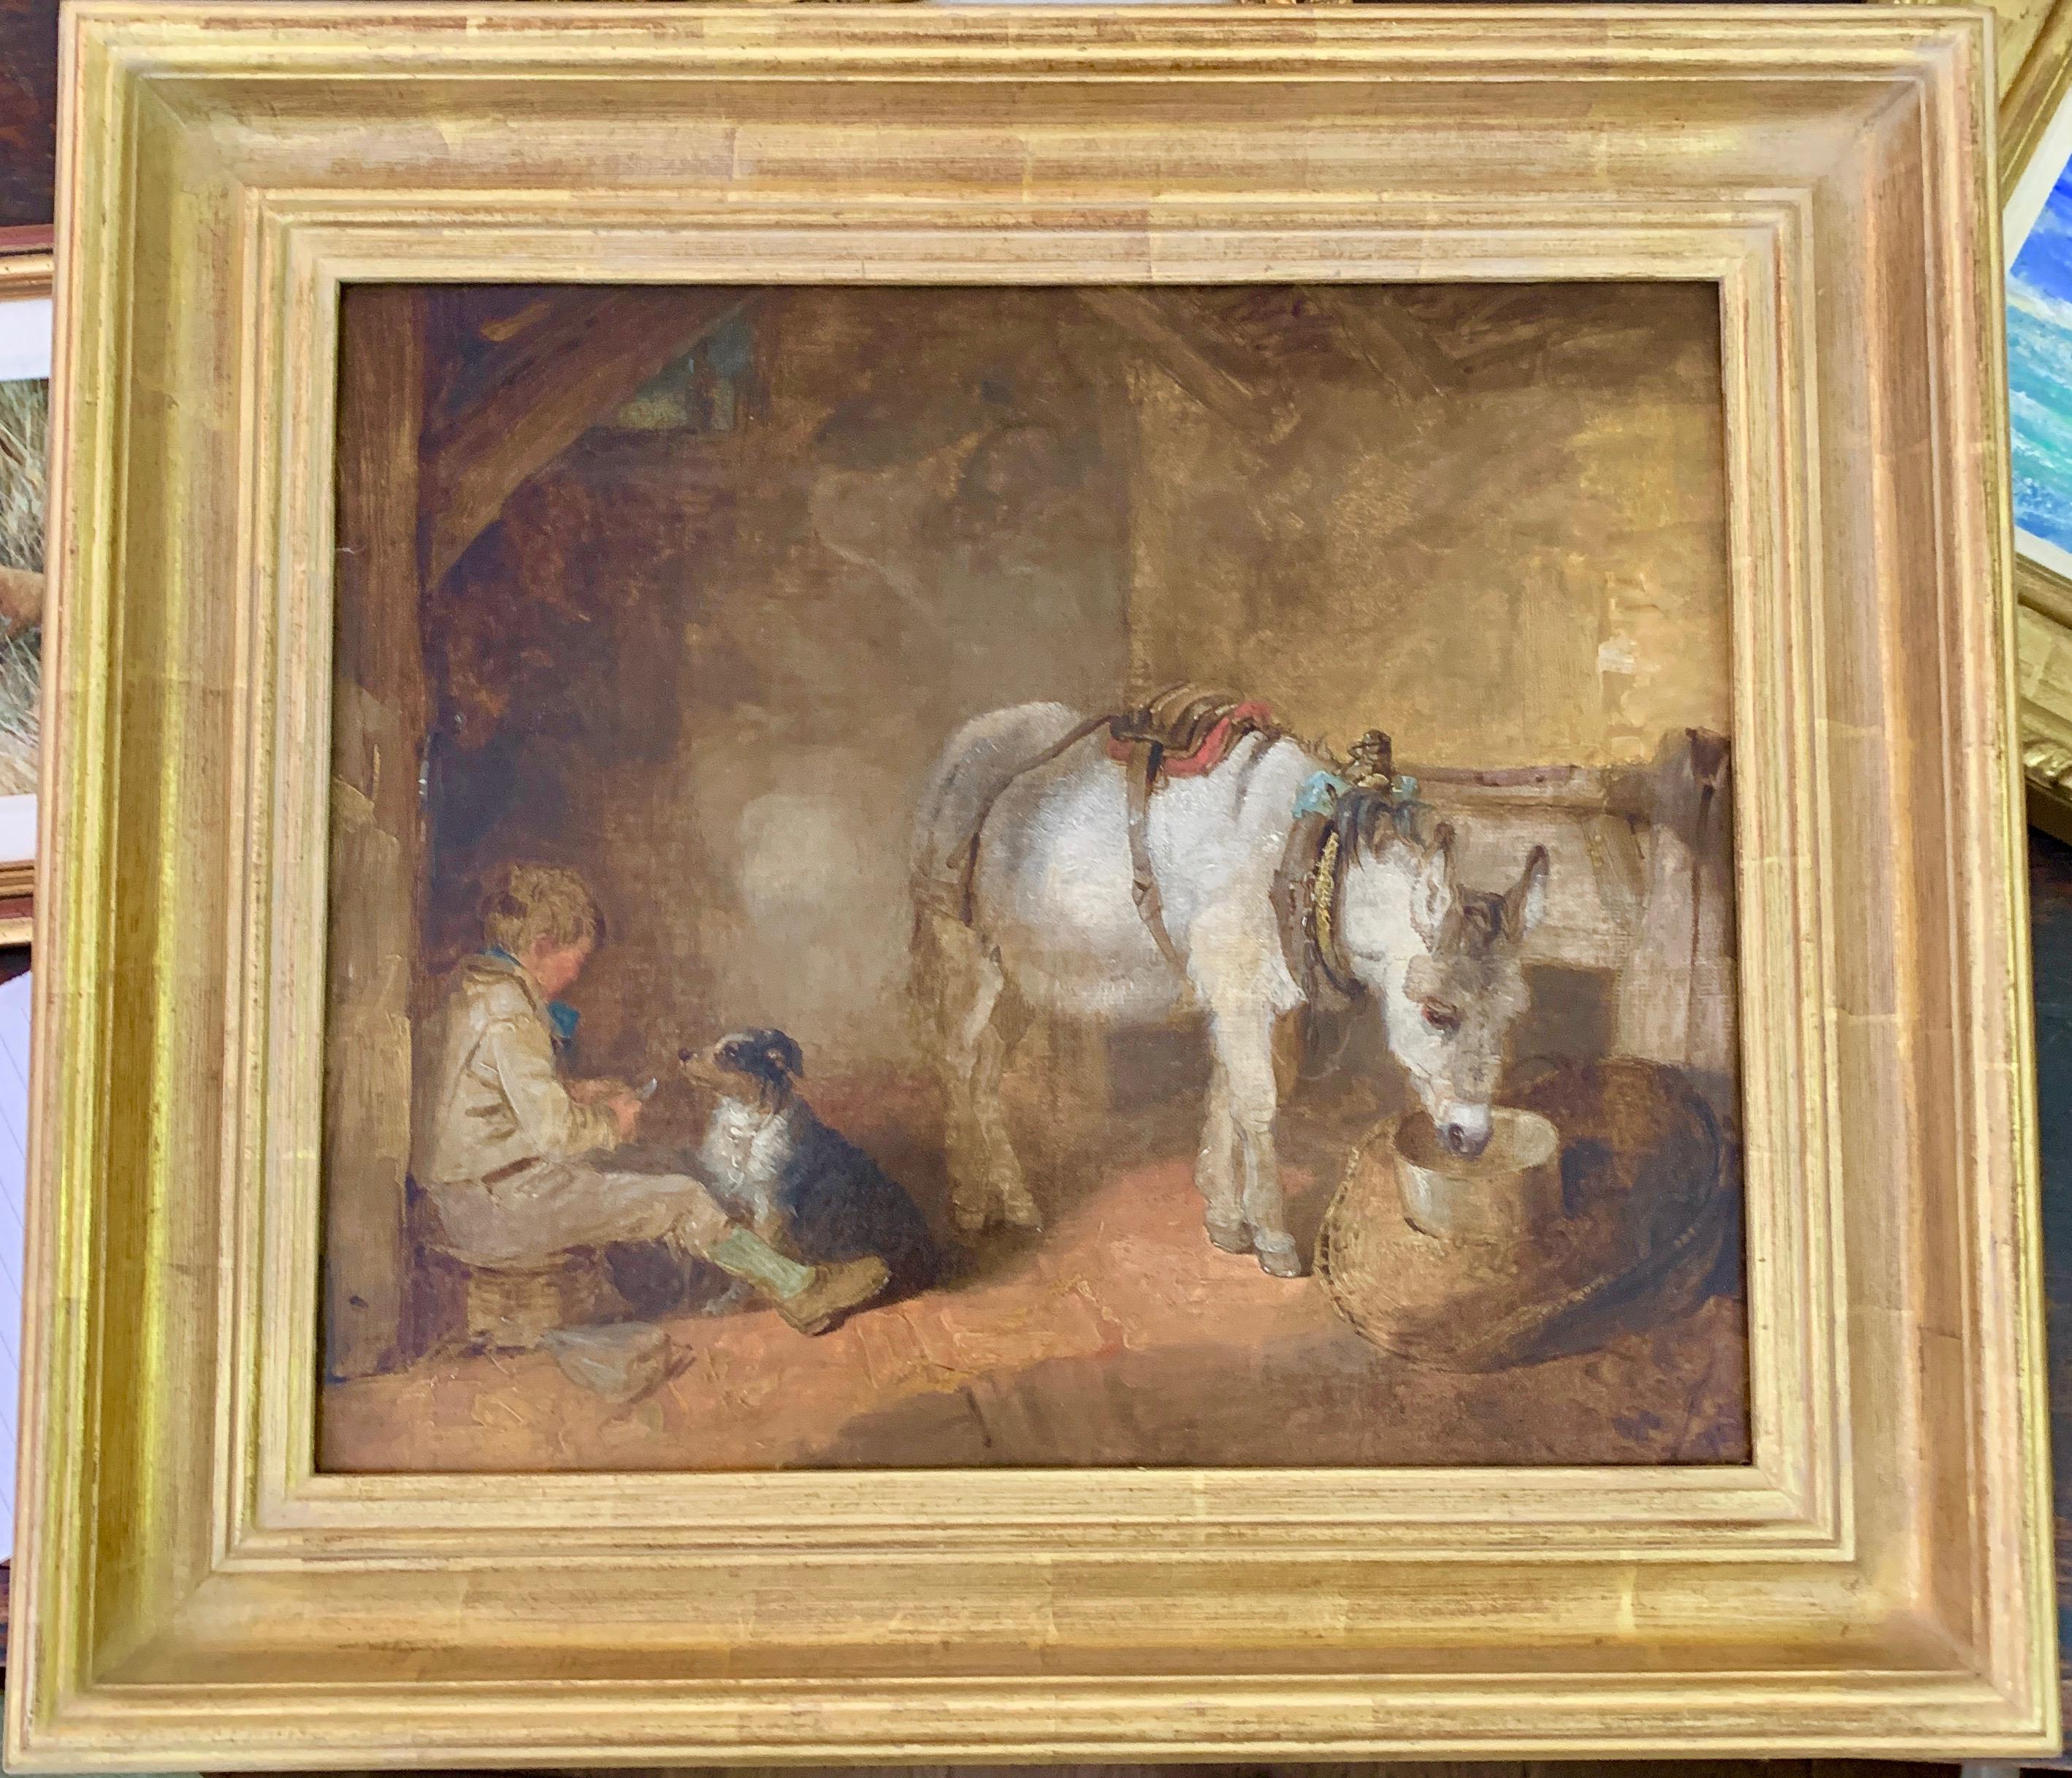 Attributed to George Morland Animal Painting - 19th century Victorian English Boy seated in a barn feeding his dog and donkey